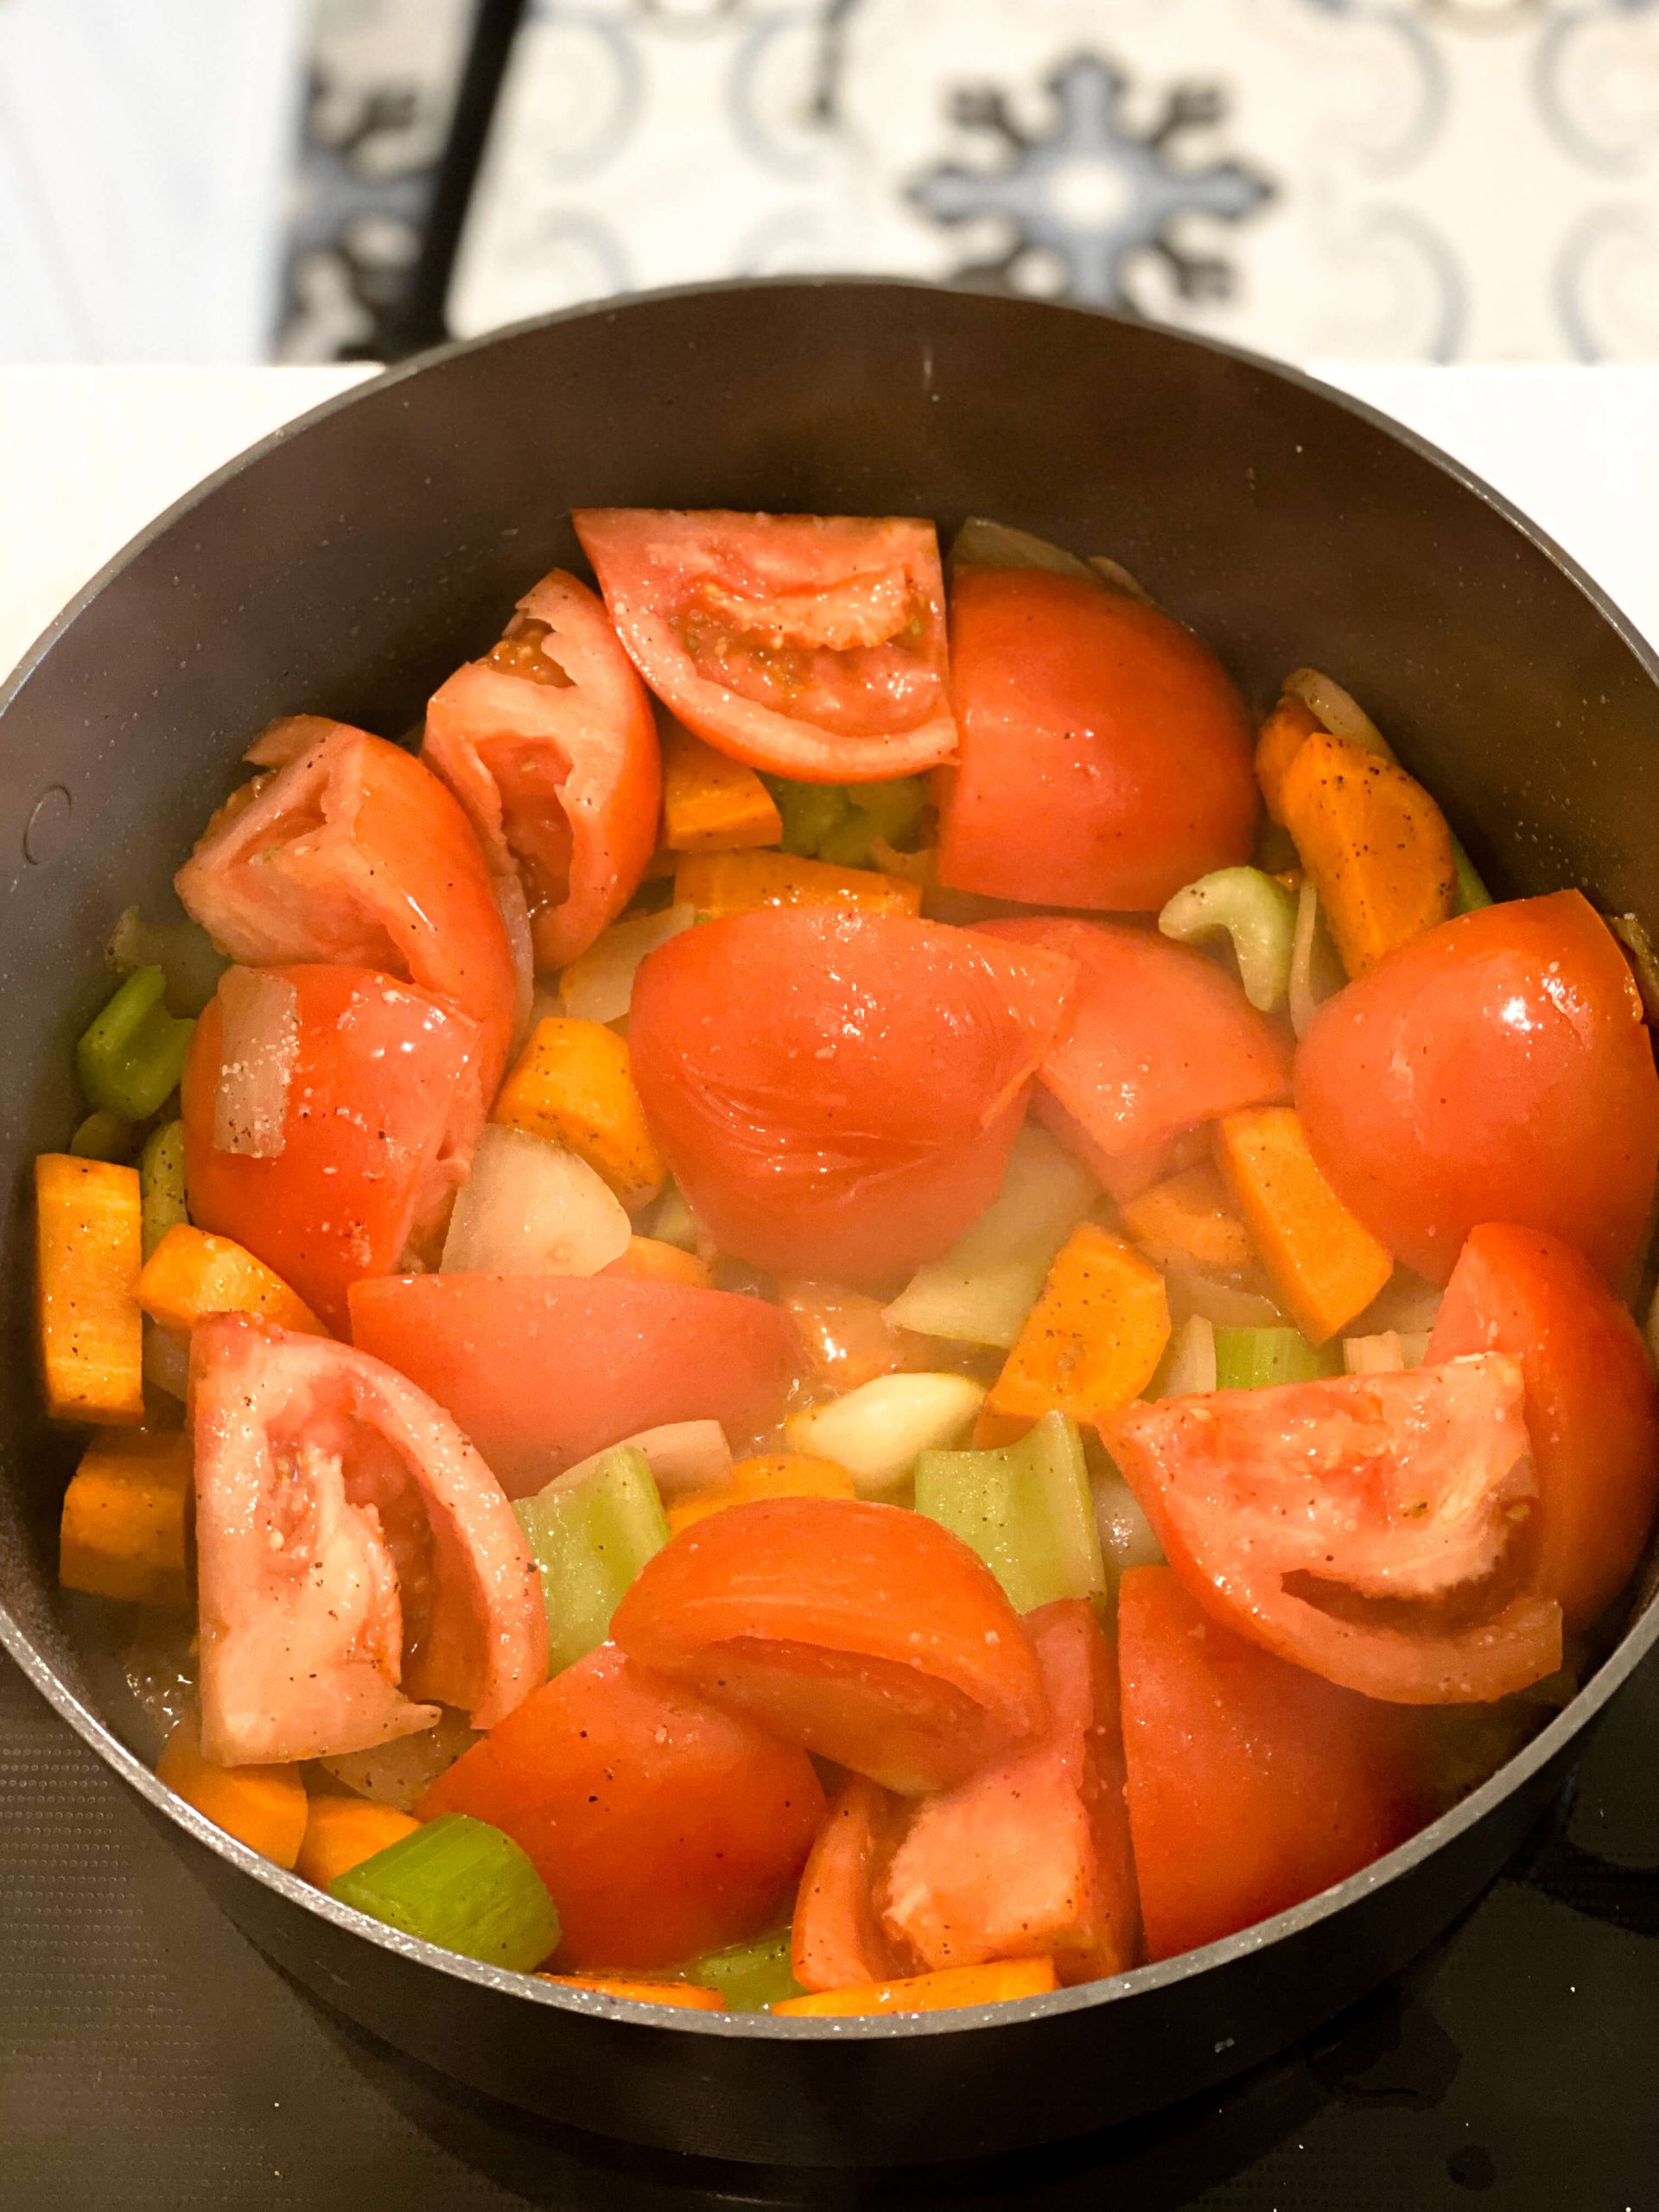 vegetables starting to soften for the creamy tomato soup recipe